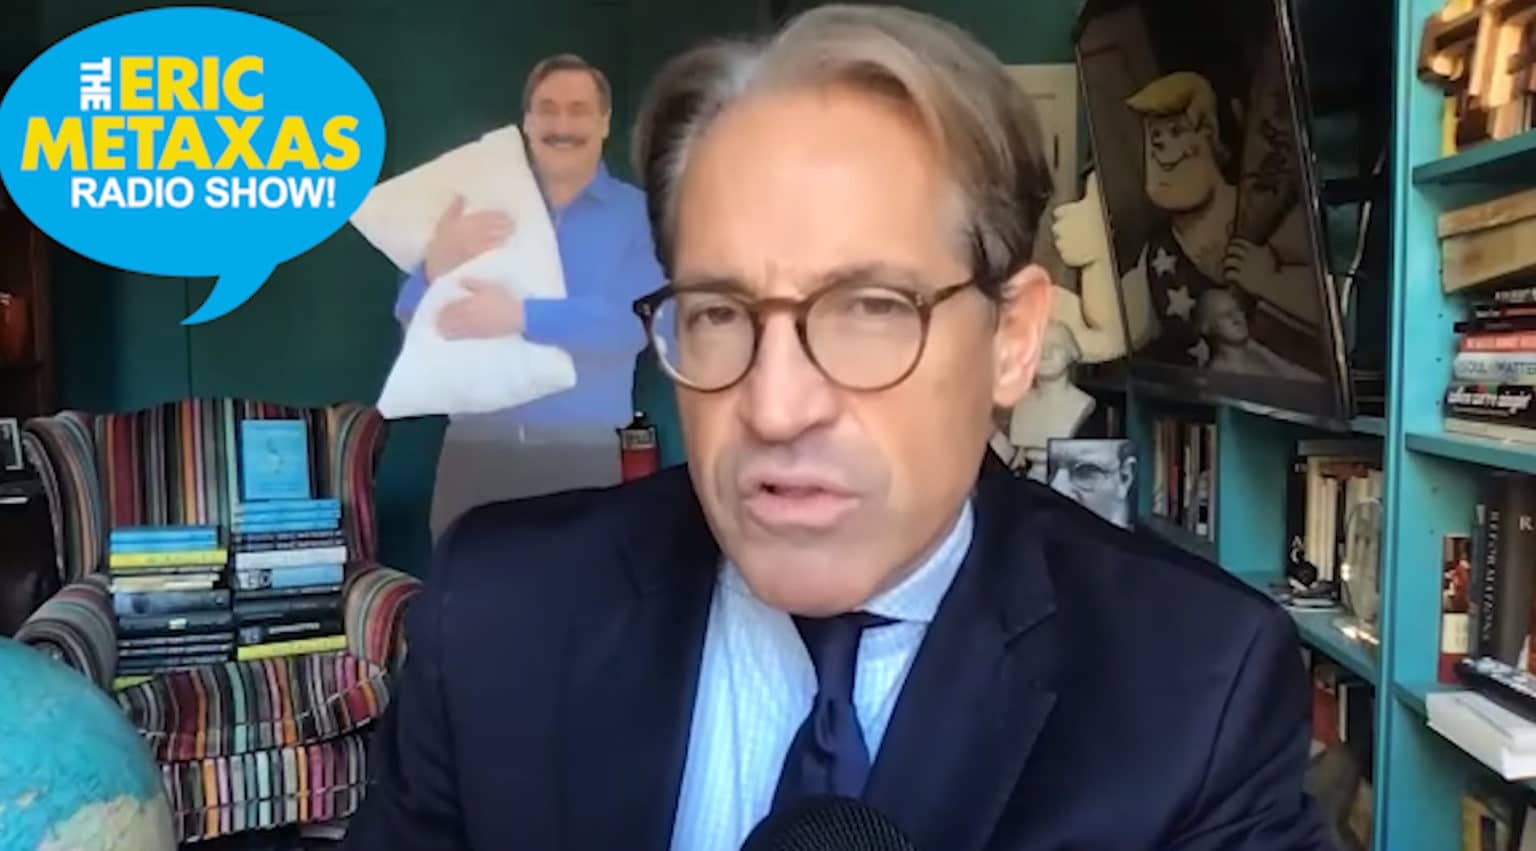 Eric Metaxas Sued for Defamation Over Claims of Voter Fraud The Roys